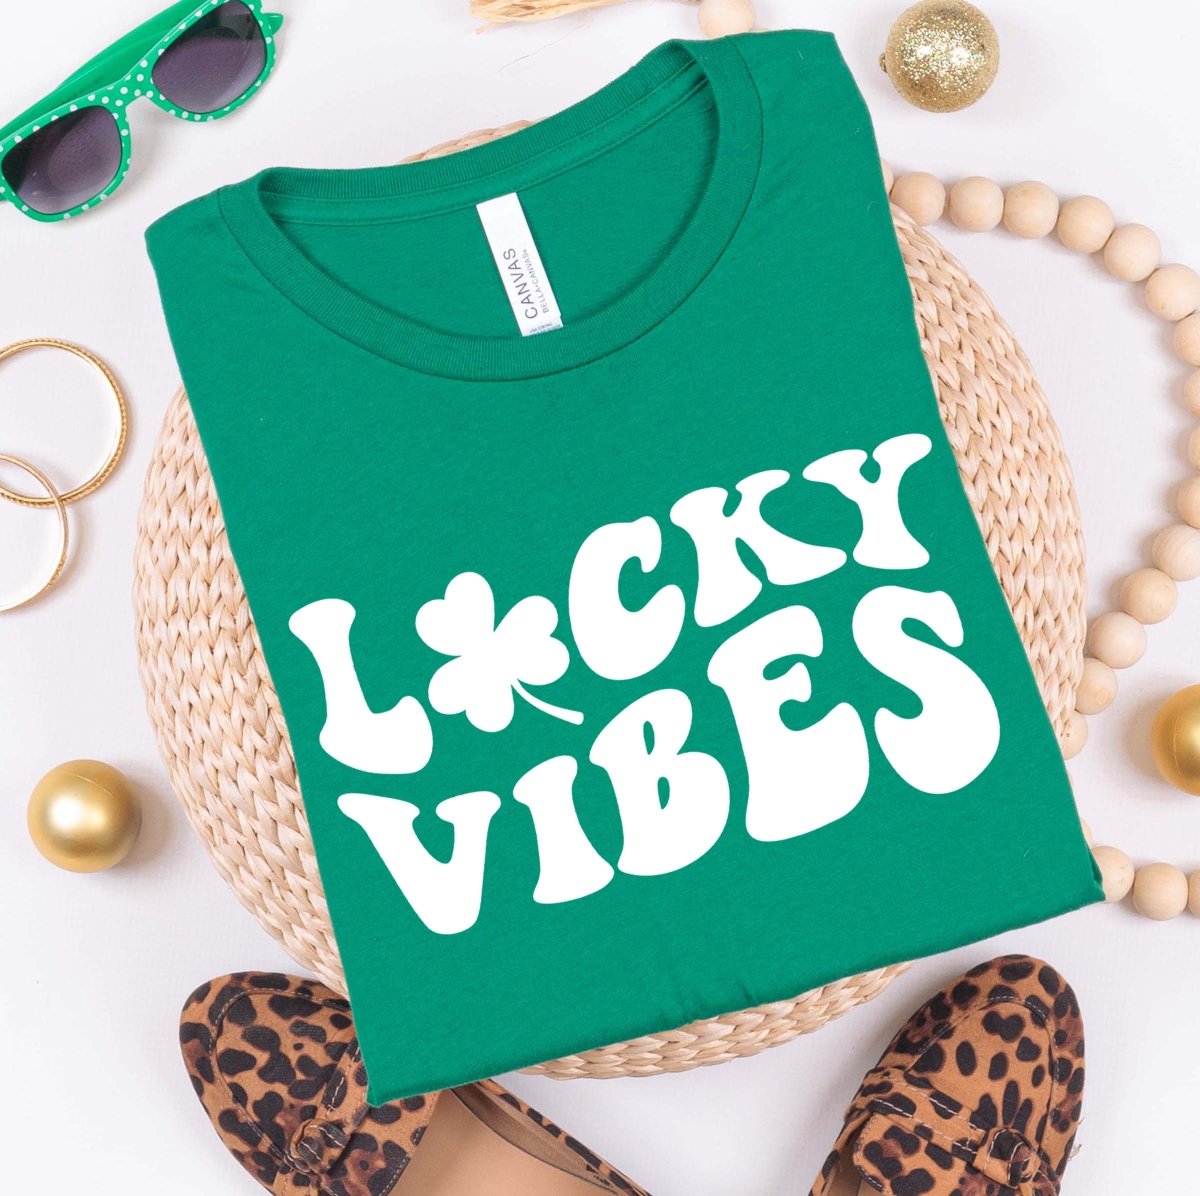 Lucky Vibes Tee - Limeberry Designs